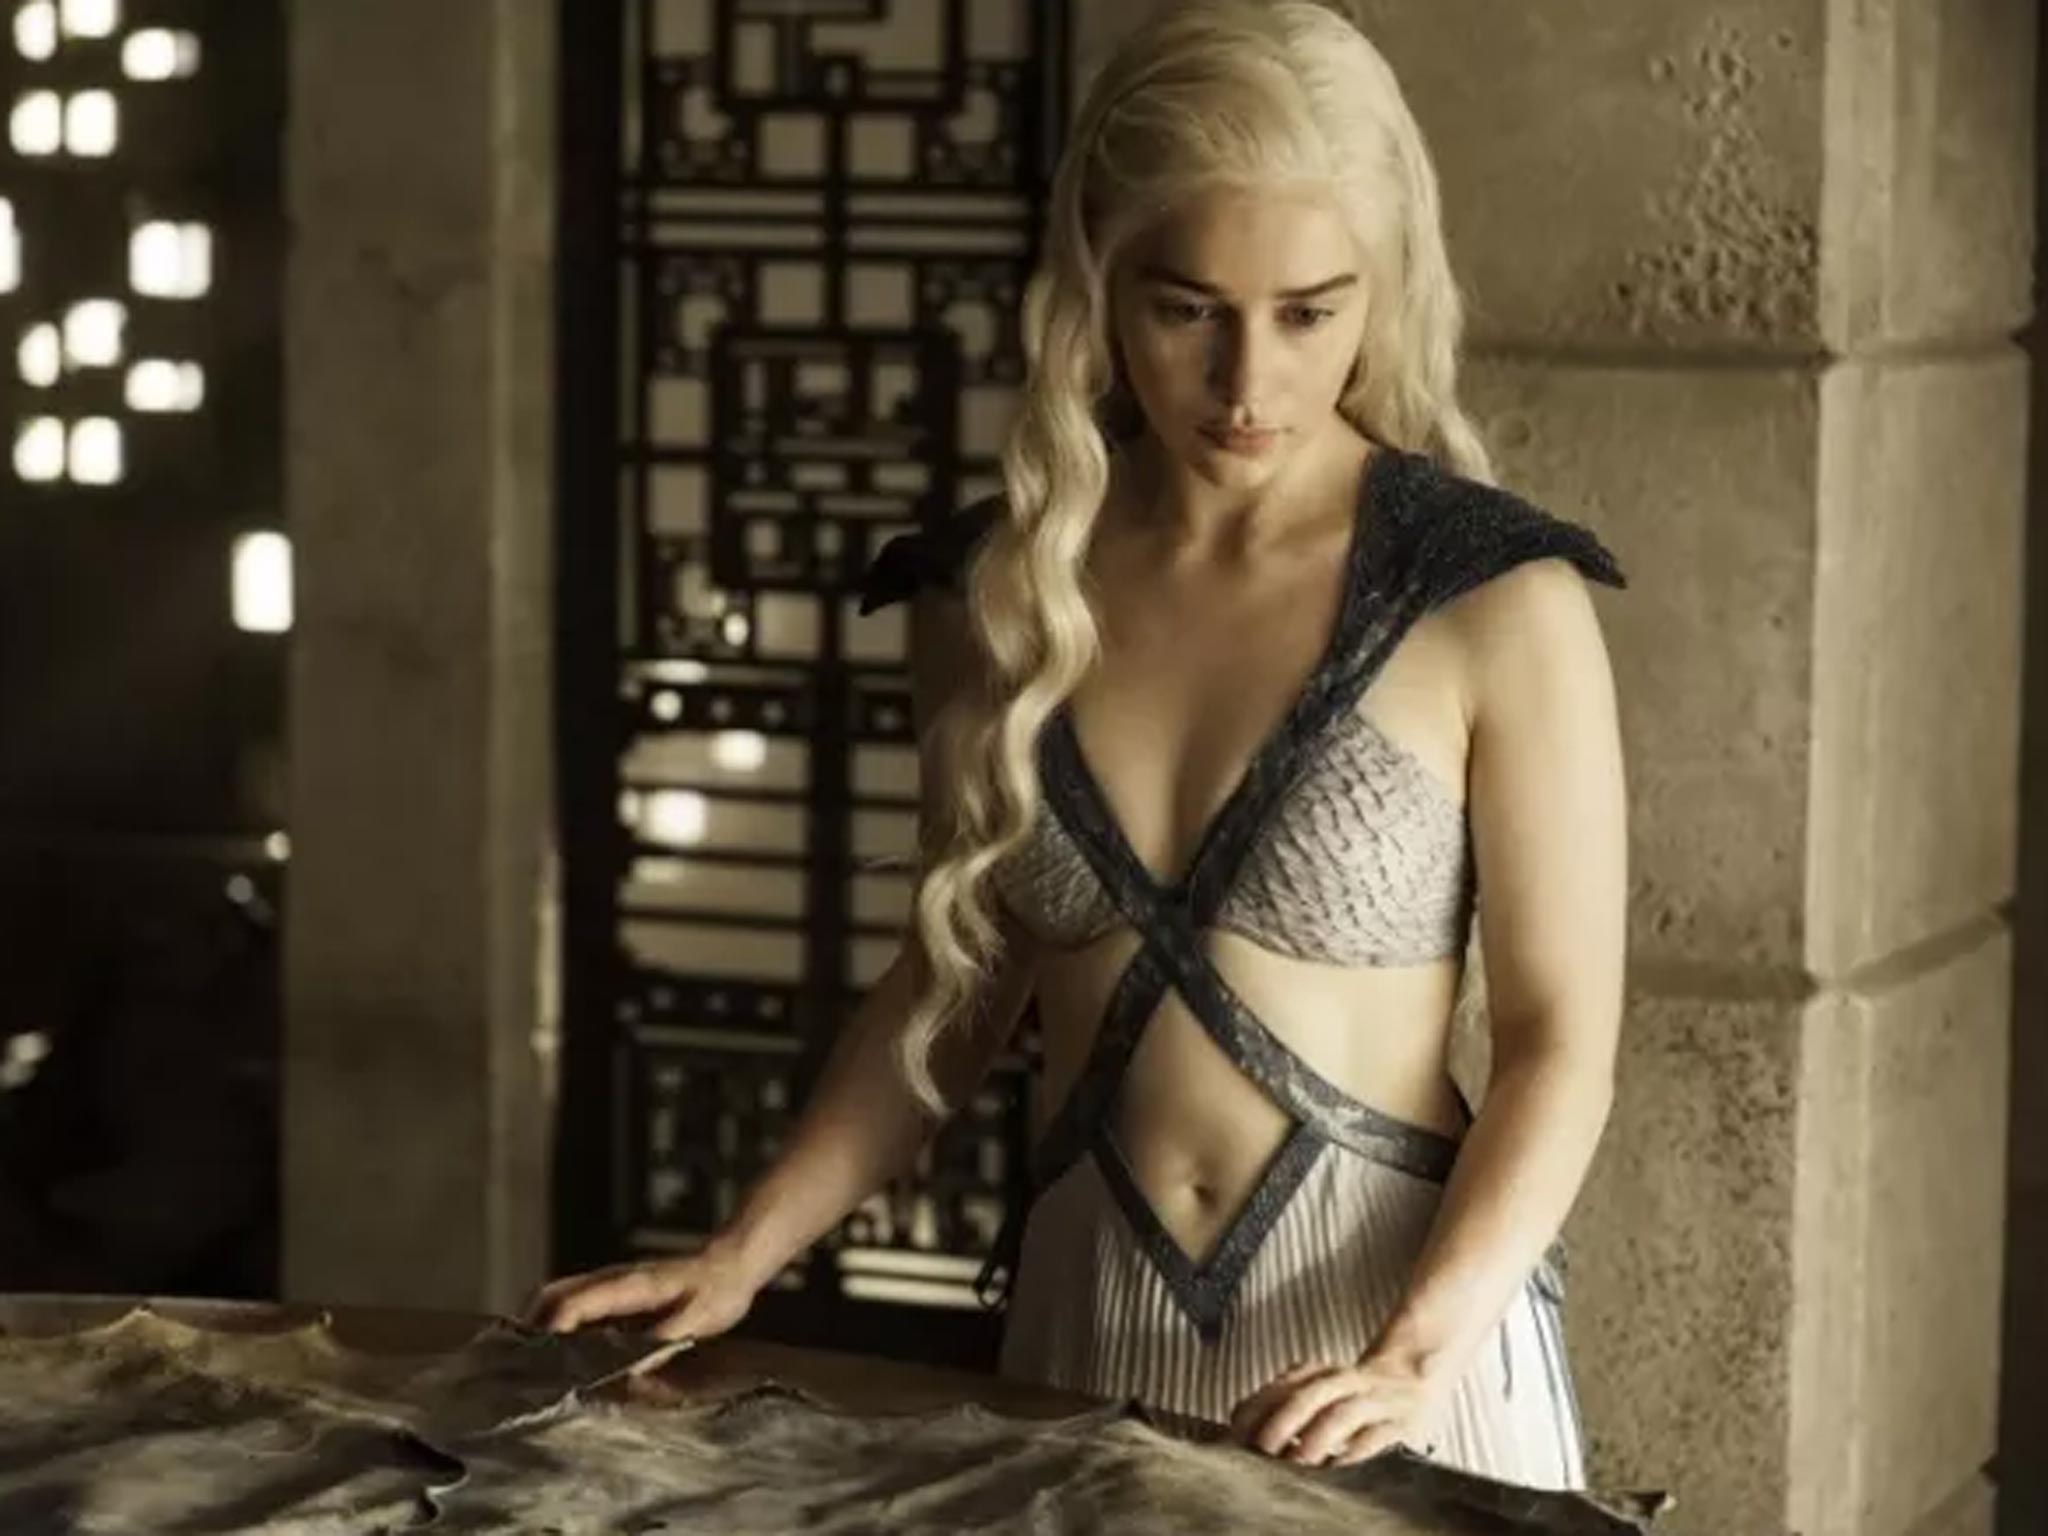 Game of Thrones season six could be a defining one for Daenerys, played by Emilia Clarke